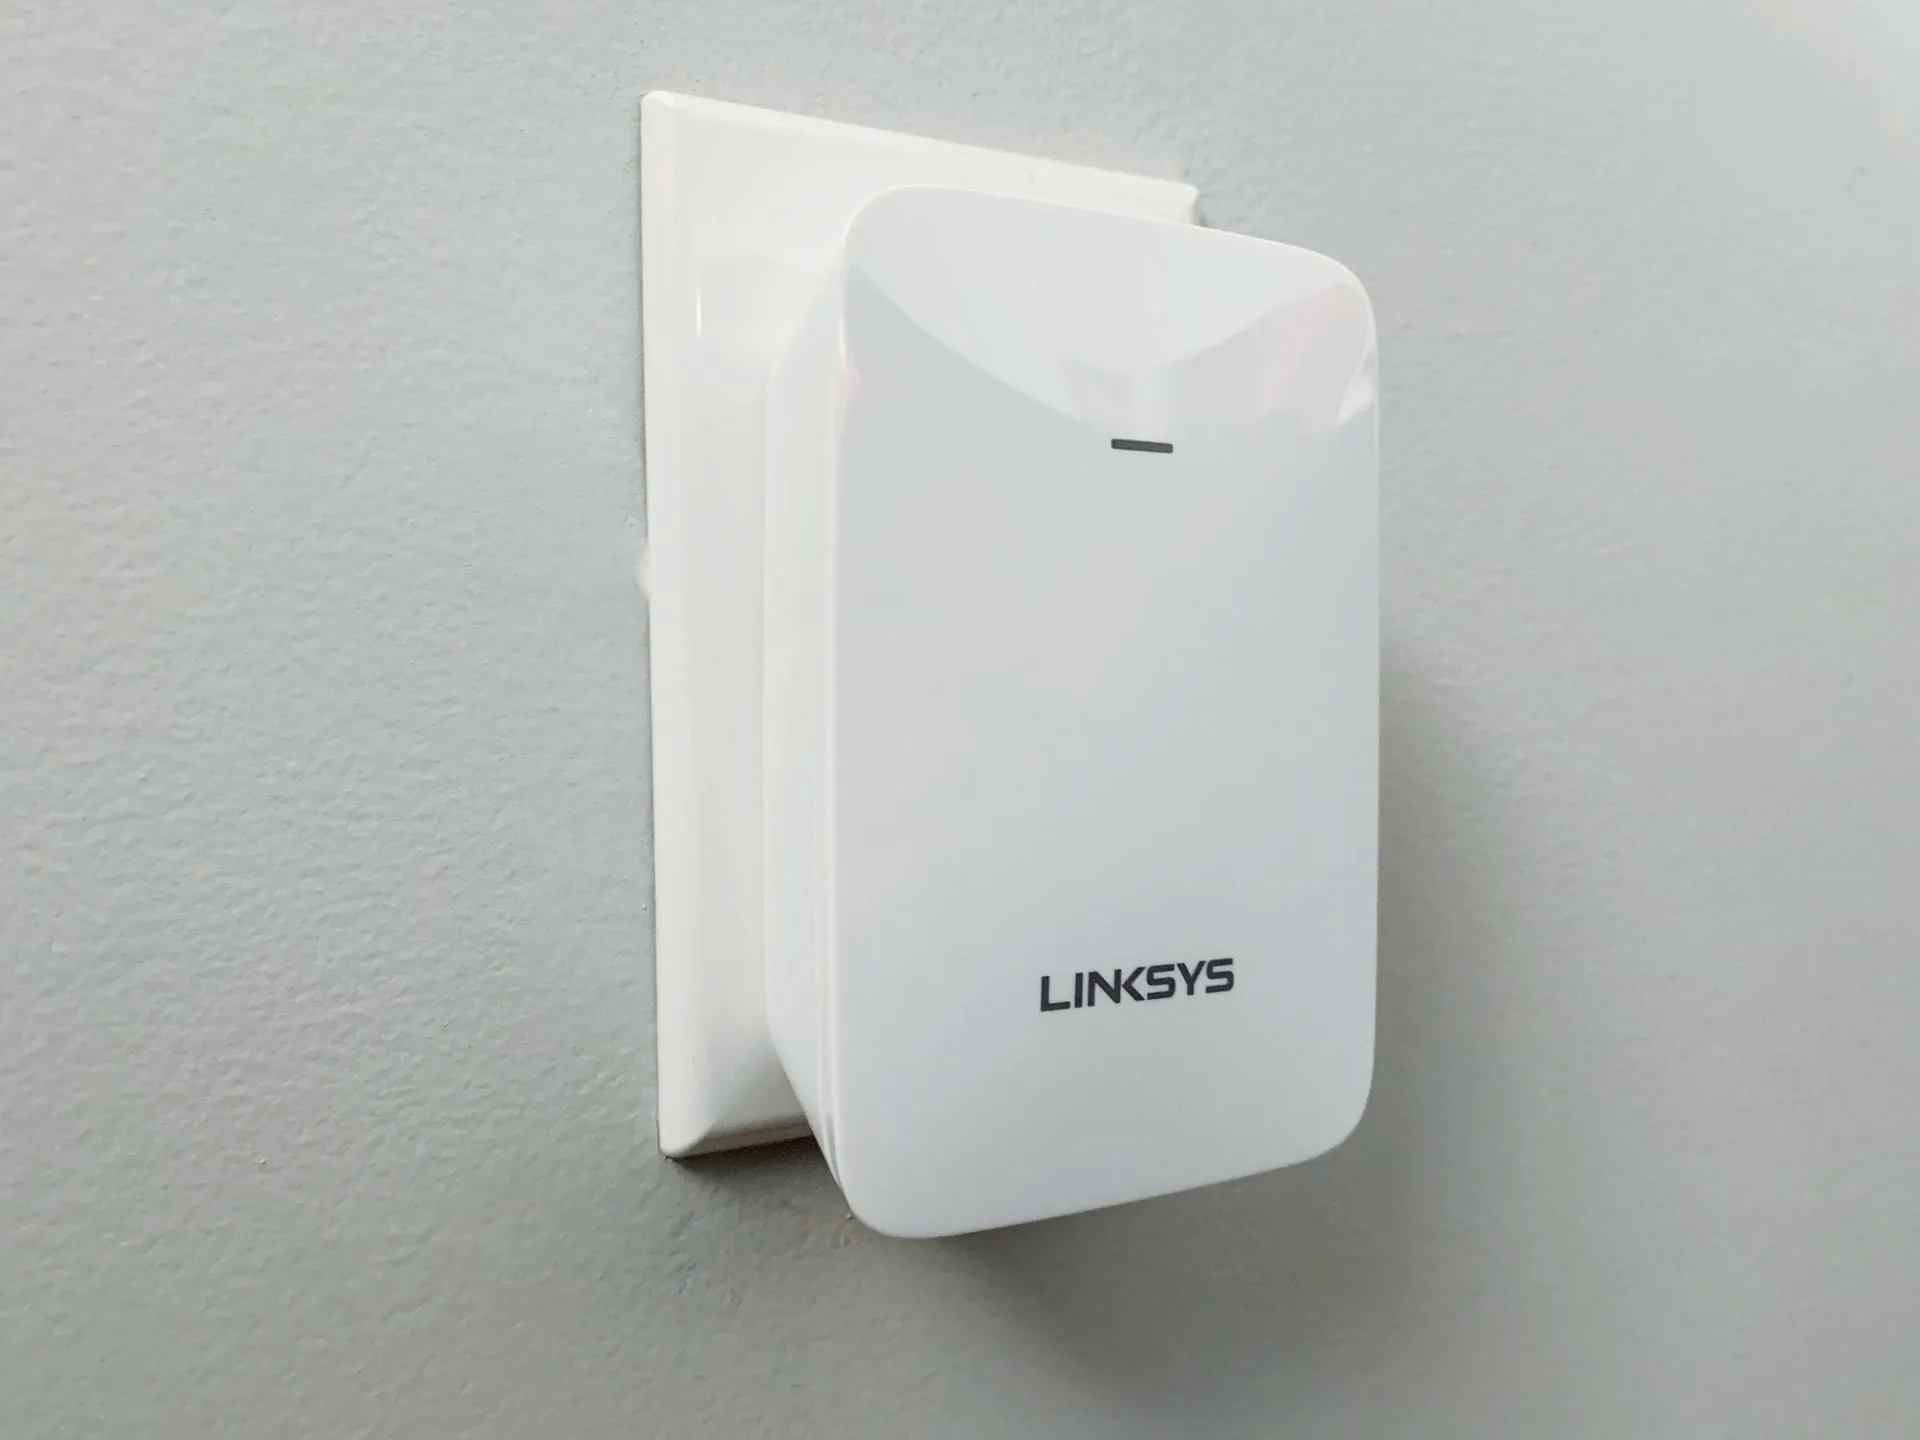 How Can I Log In to My Linksys WiFi Extender?